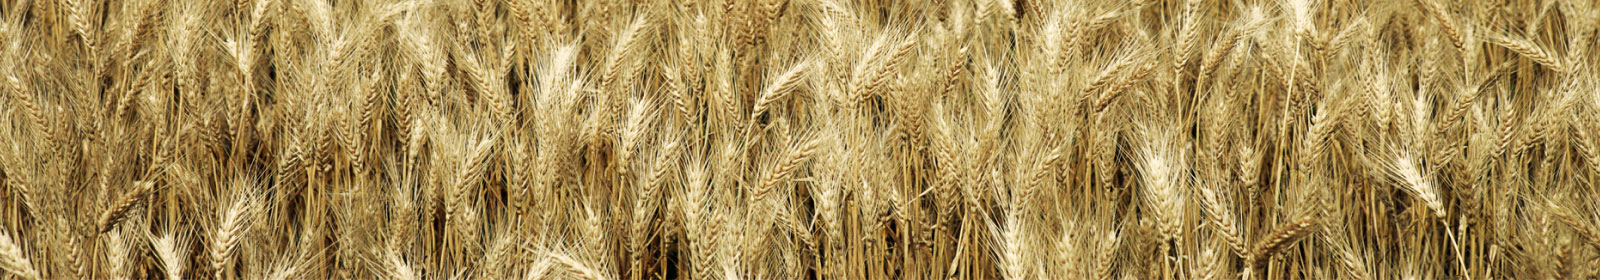 a close up of wheat stalks in a field